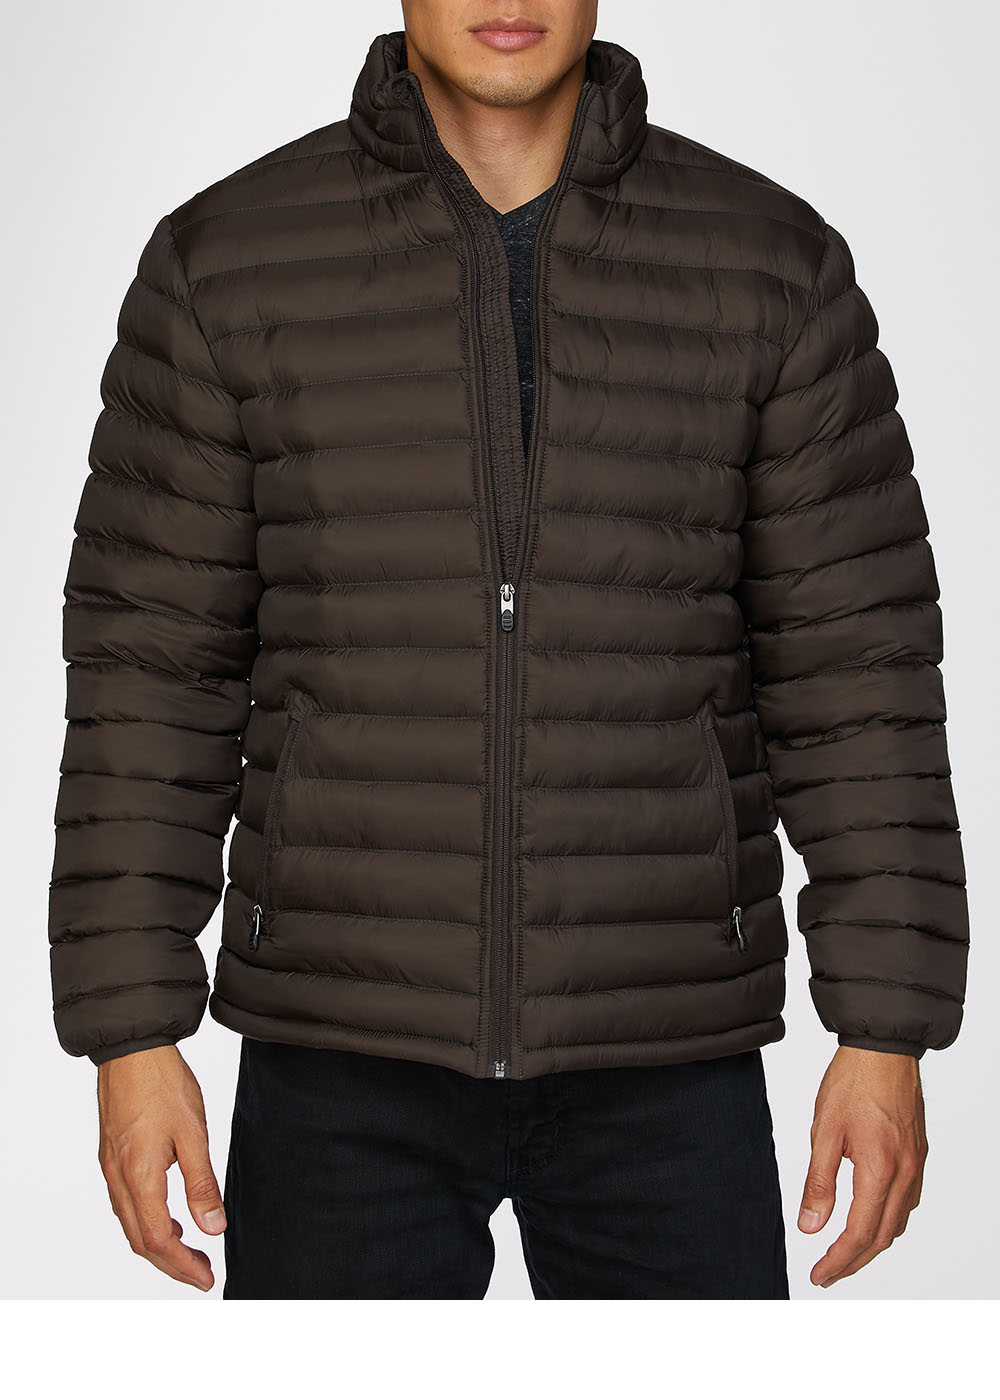  Men's High-Quality Nylon Quilted Jacket With Contrast Lining-Brown